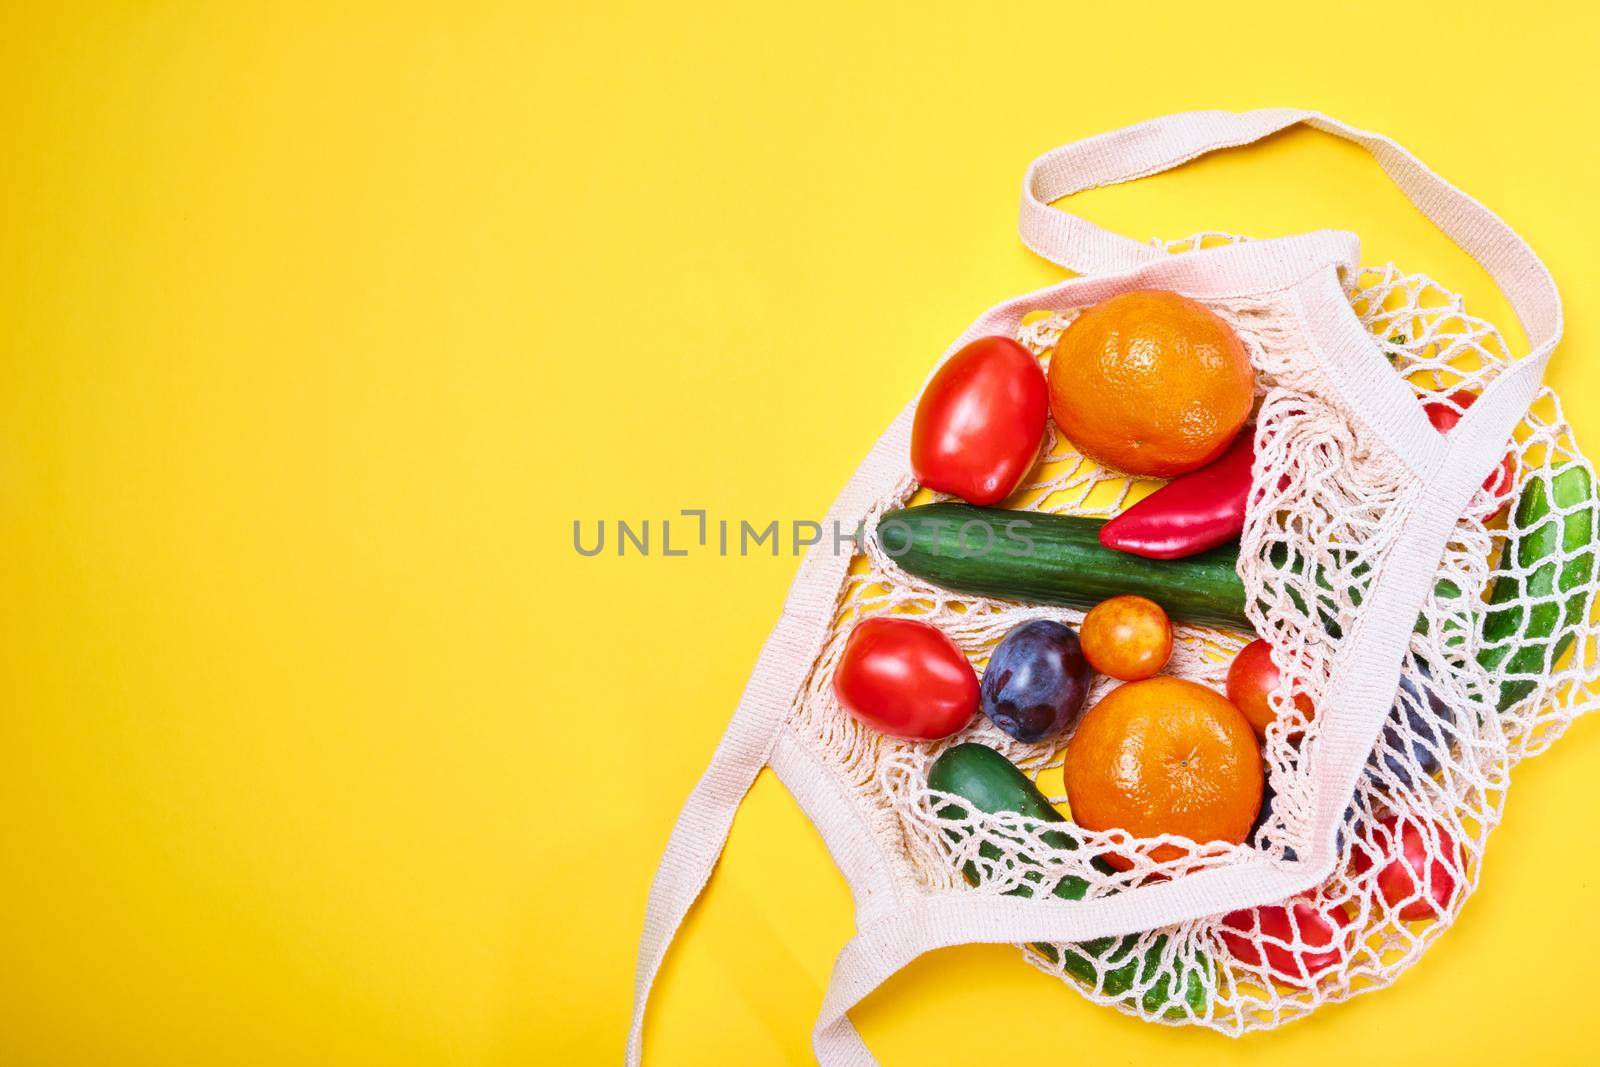 groceries in eco bags. eco natural bags with fruits and vegetables, eco friendly, flat lay. sustainable lifestyle concept. zero waste food shopping. plastic free items. reuse, reduce, recycle, refuse